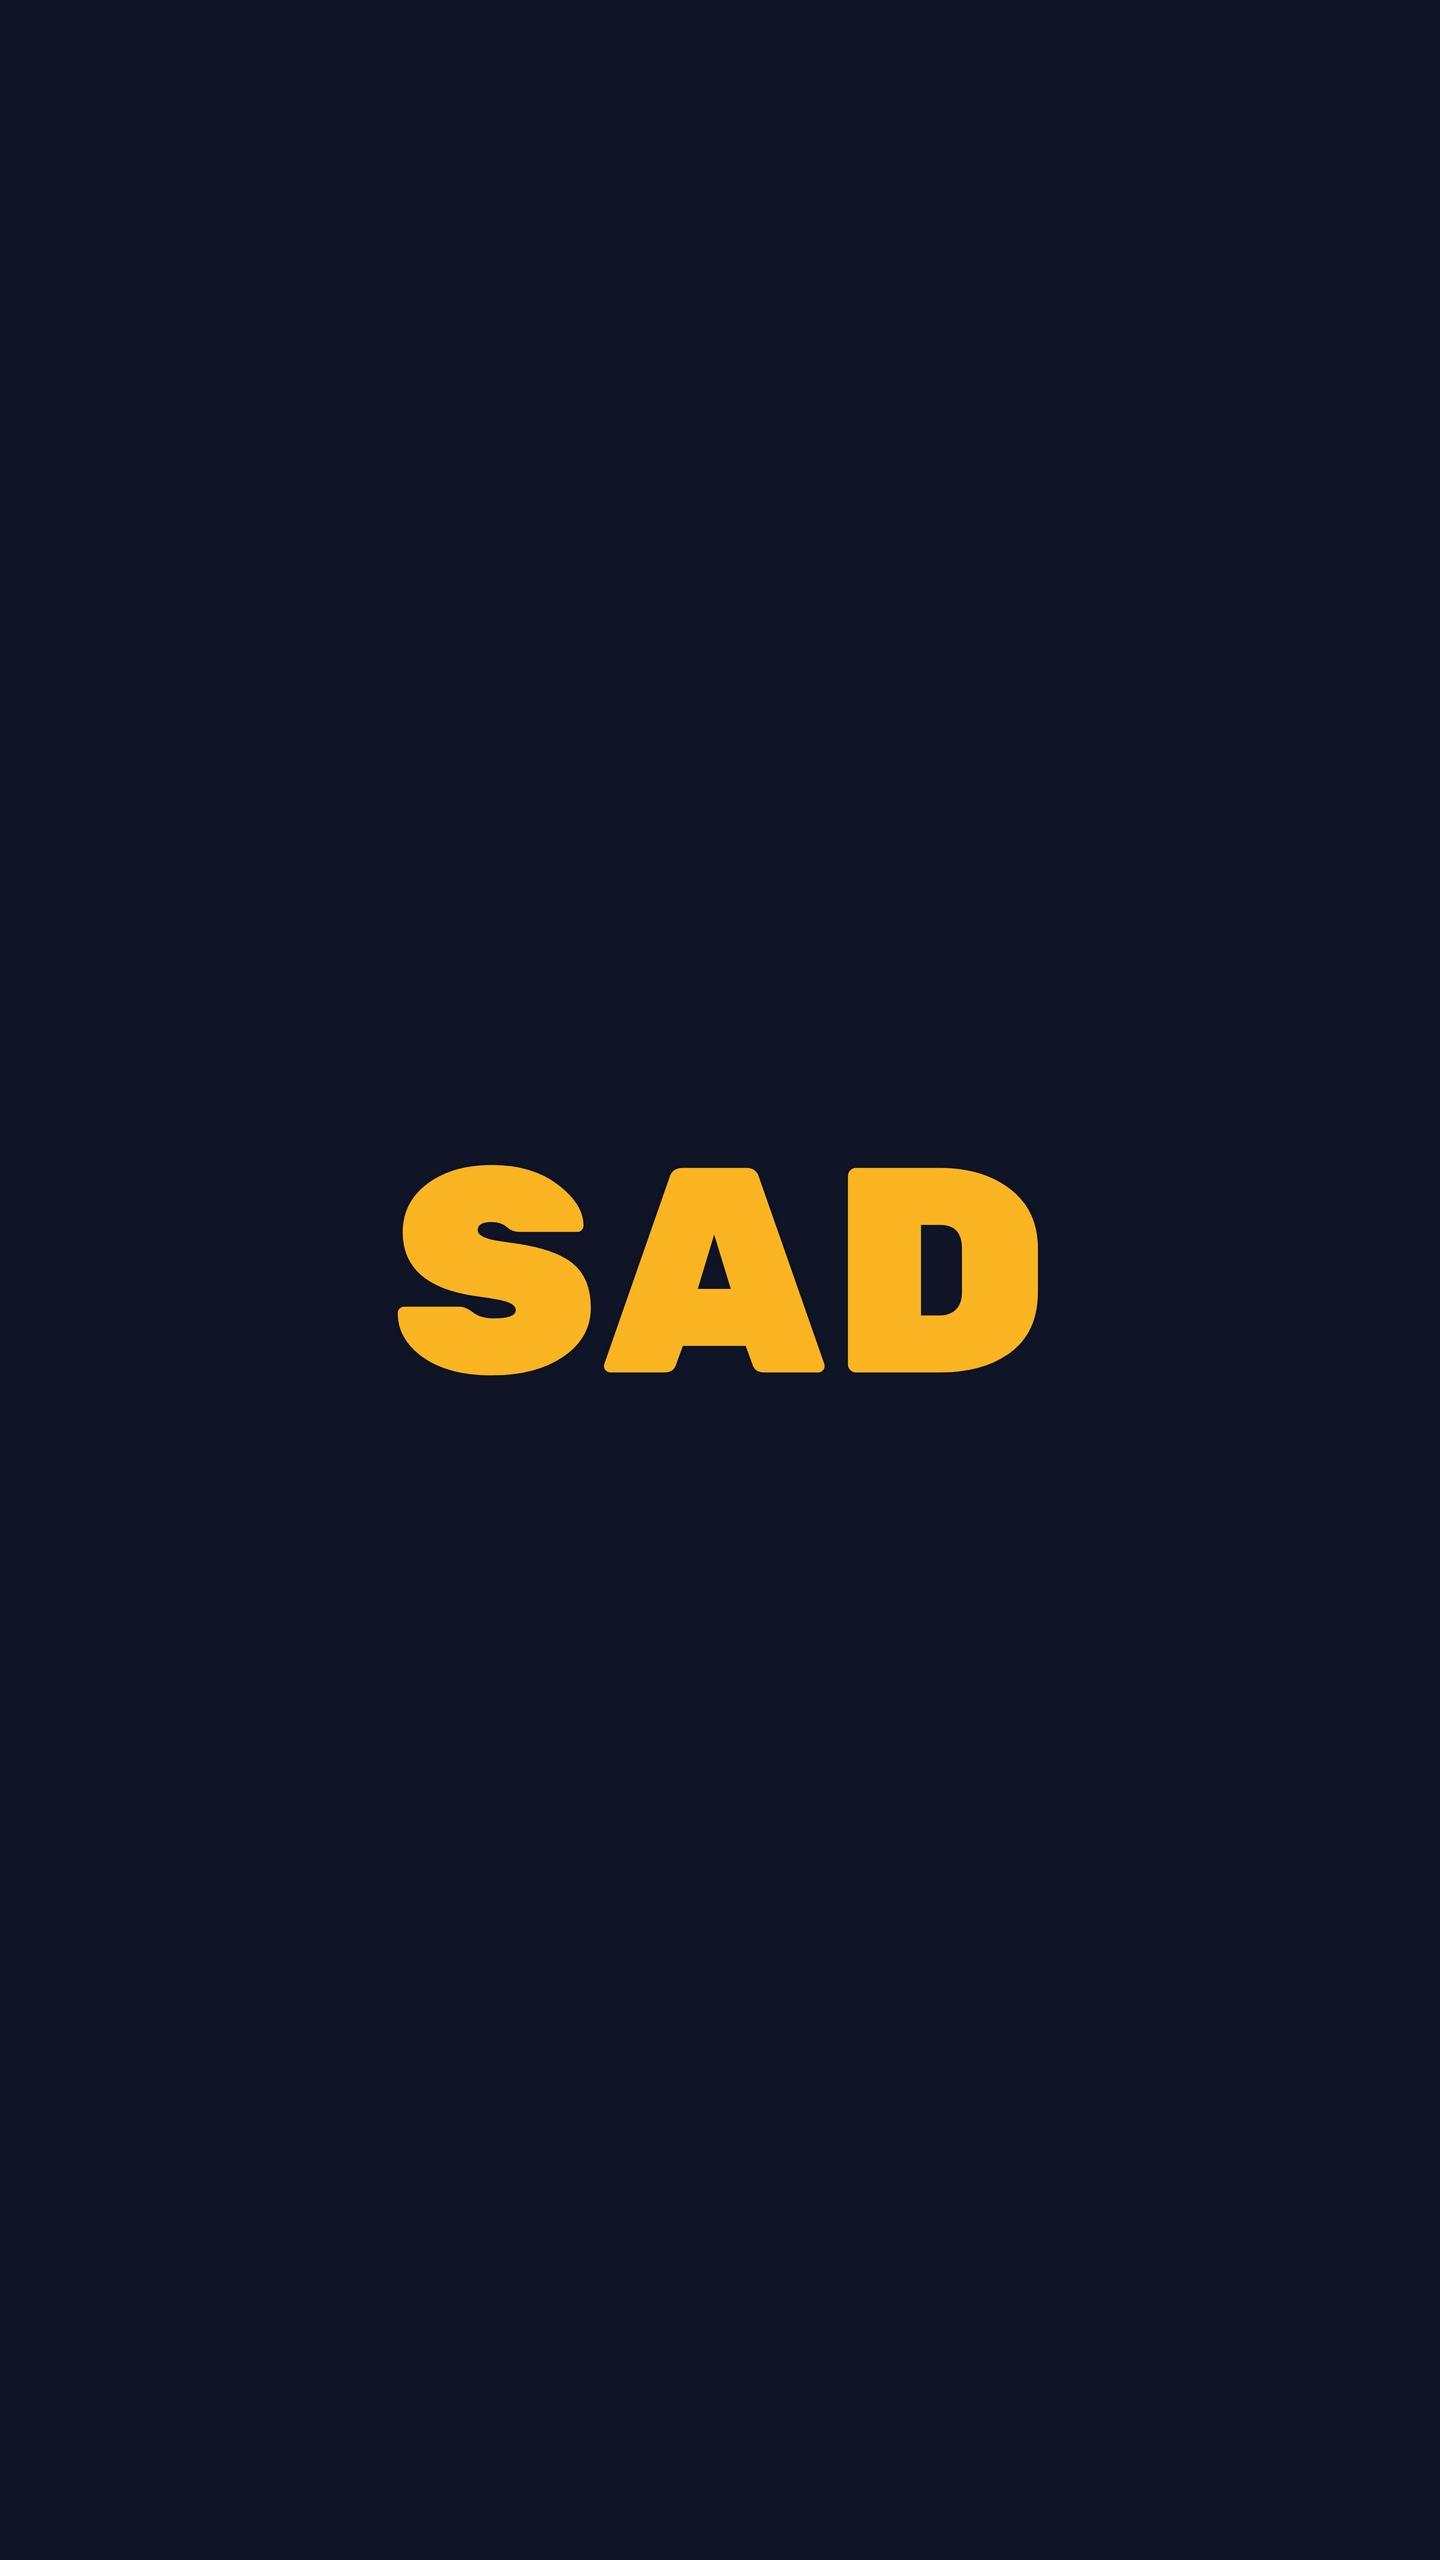 what is another word for sad